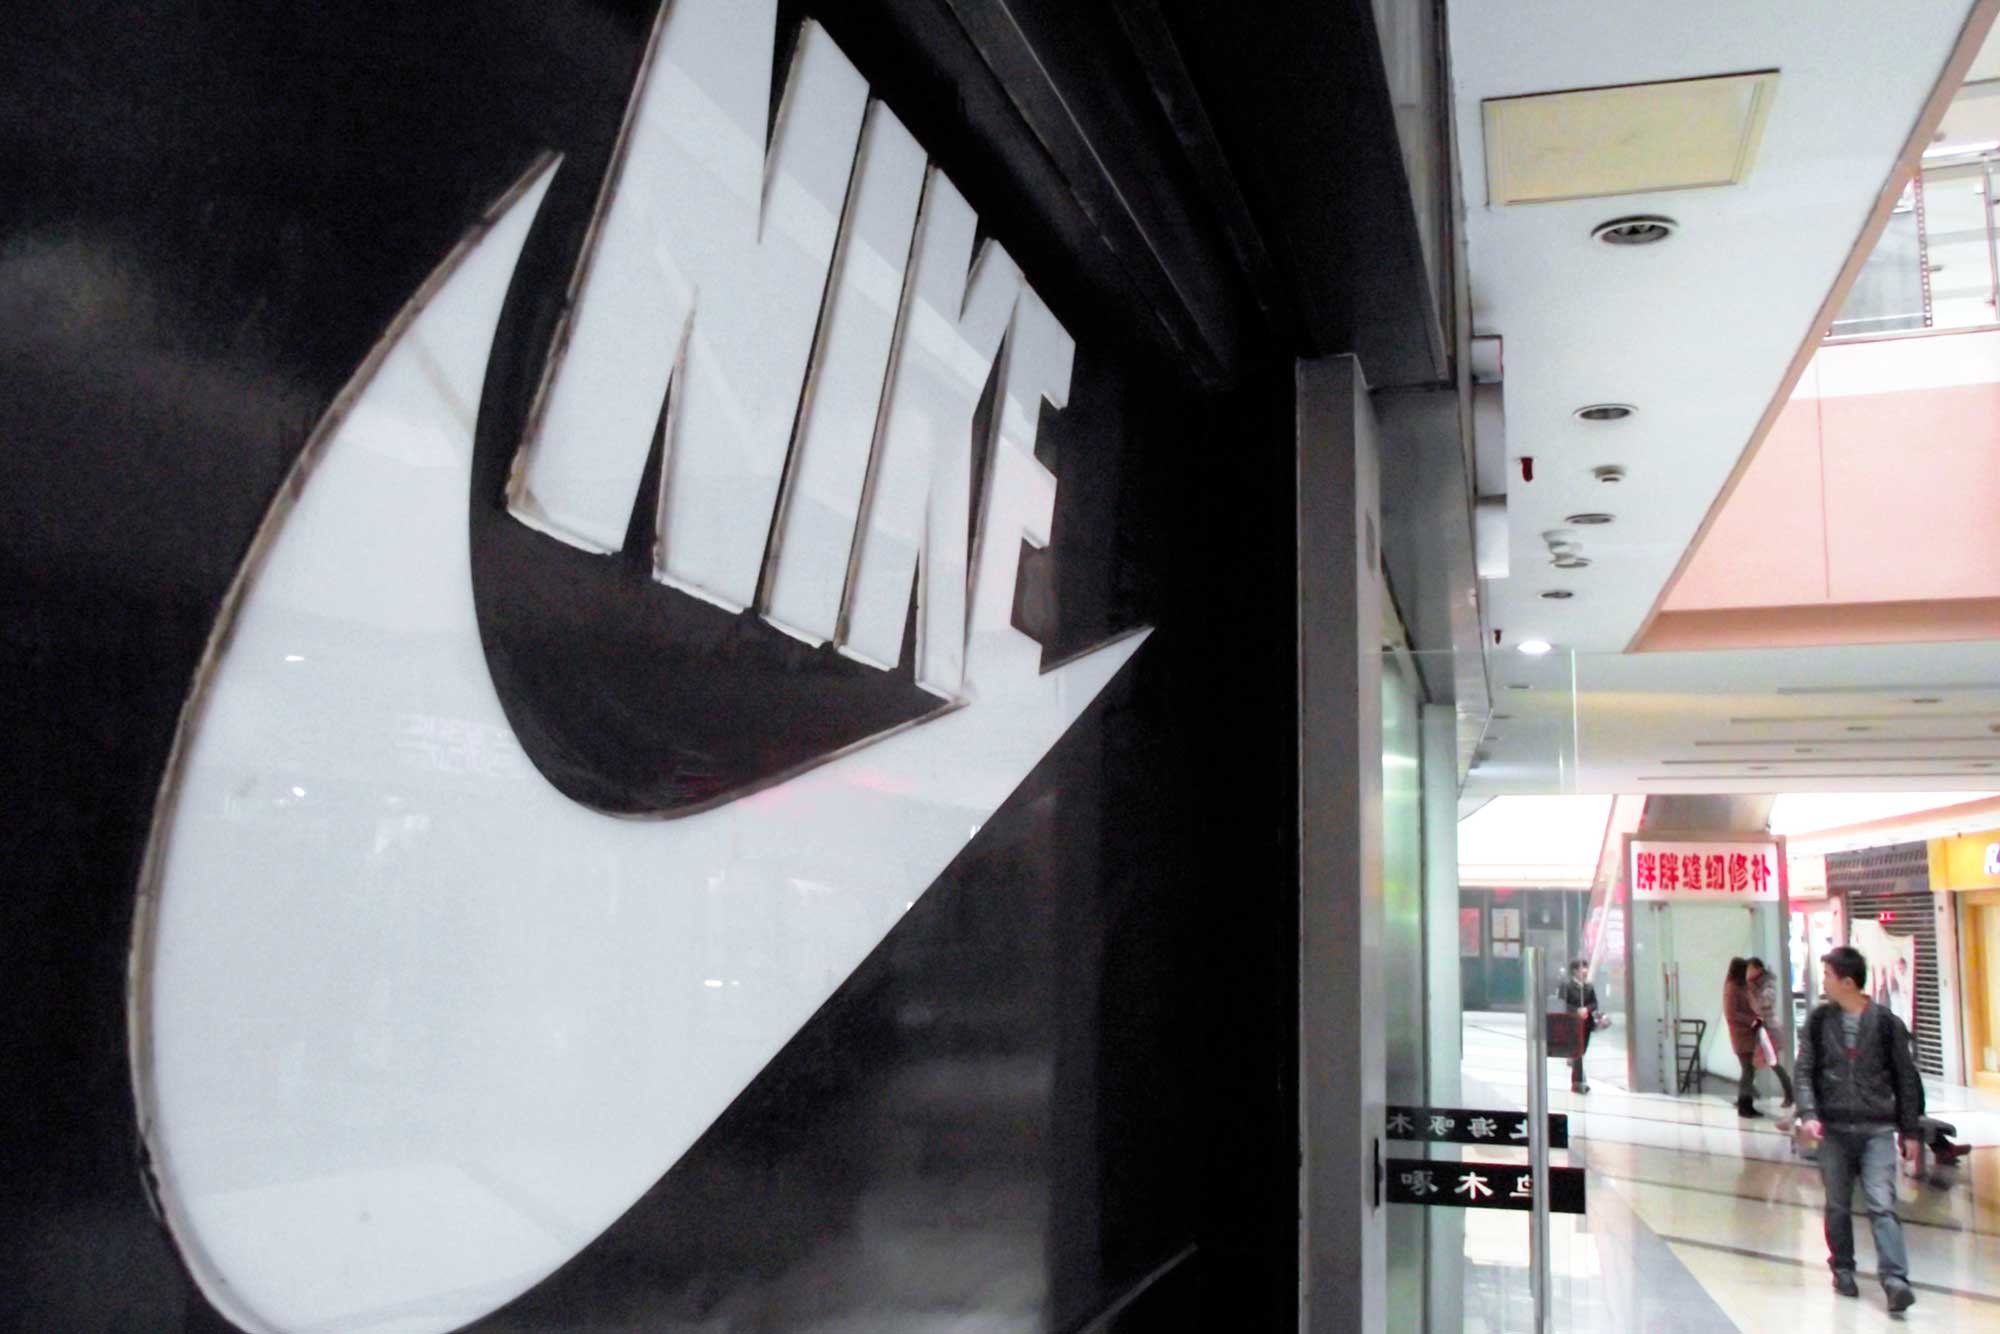 Picante A veces a veces junto a Here's how much Nike's billionaire founder paid for its swoosh logo